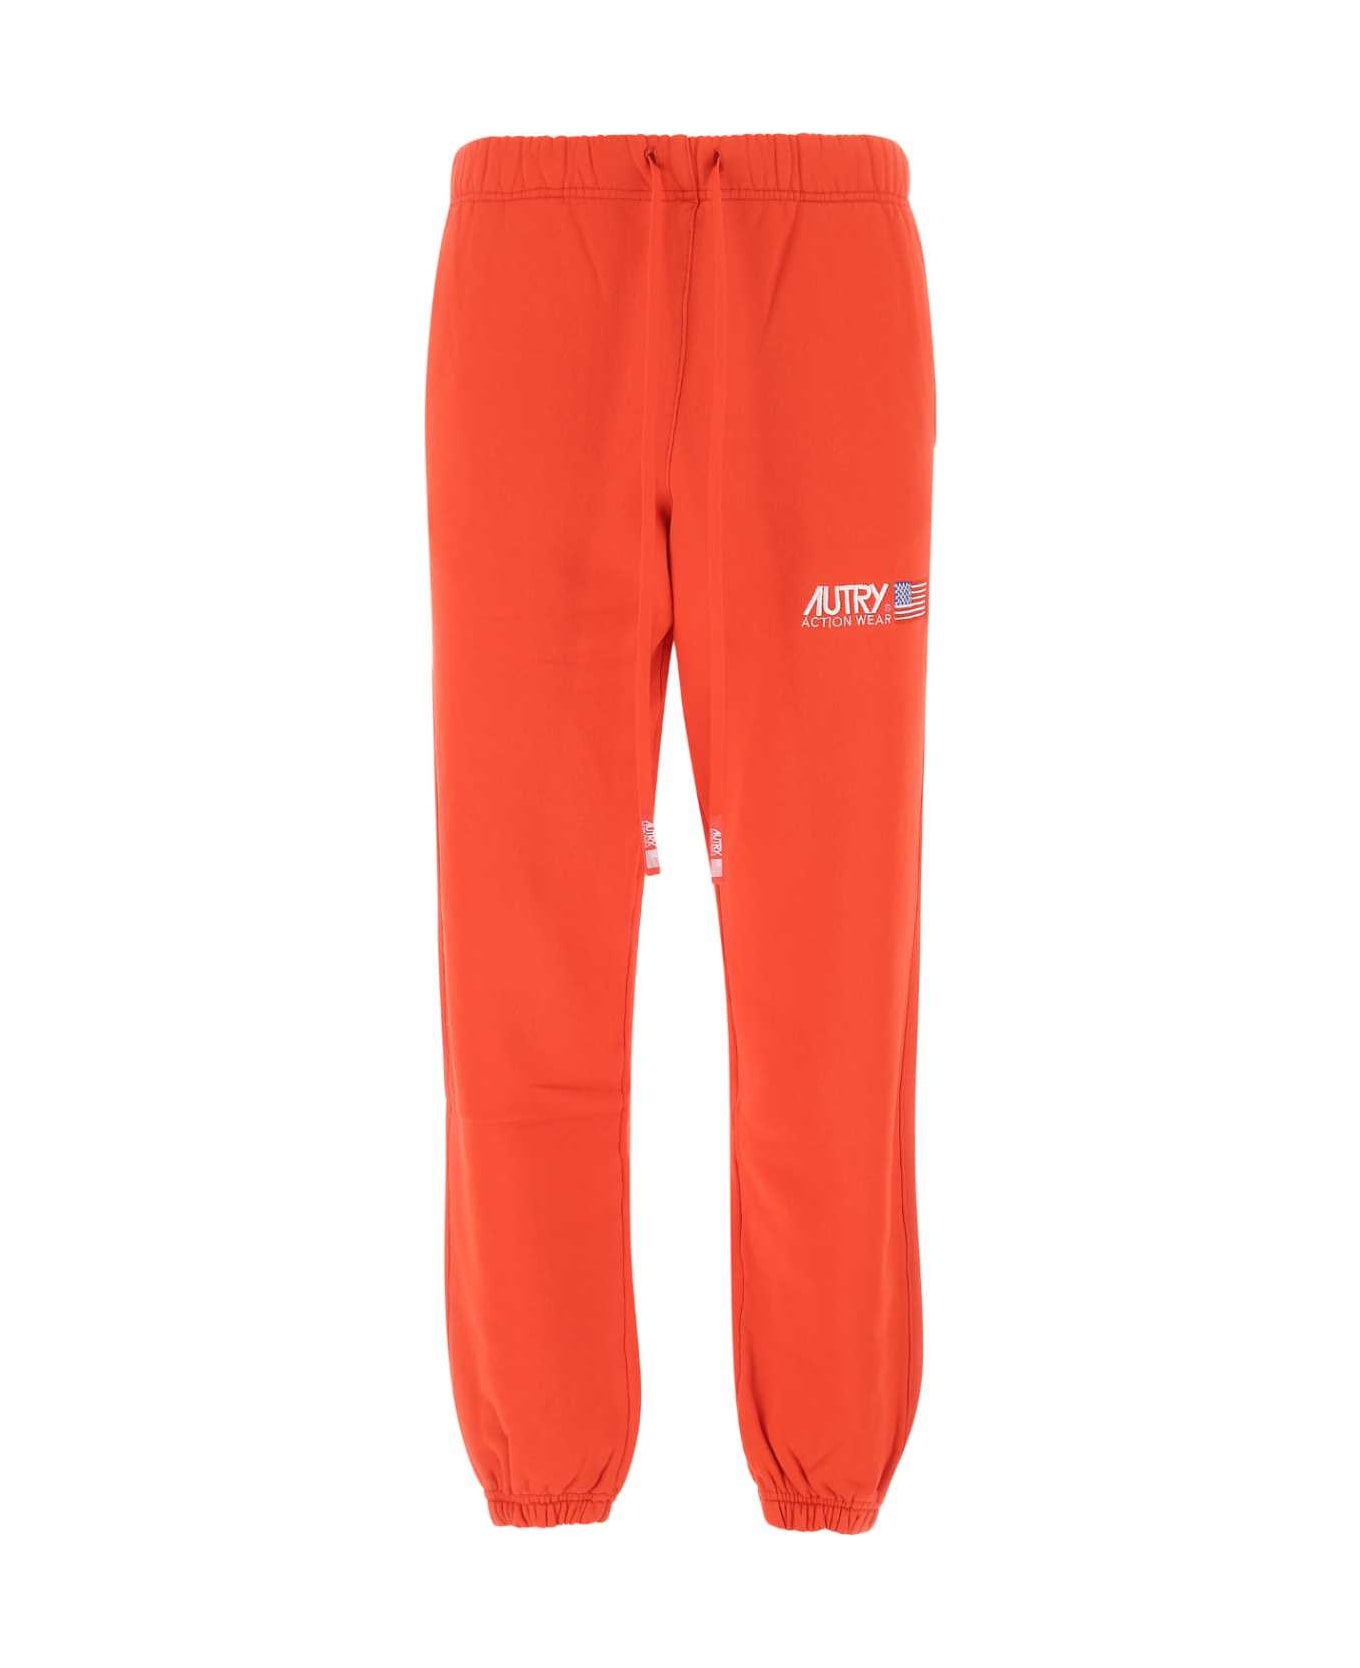 Autry Red Cotton Joggers - 1544